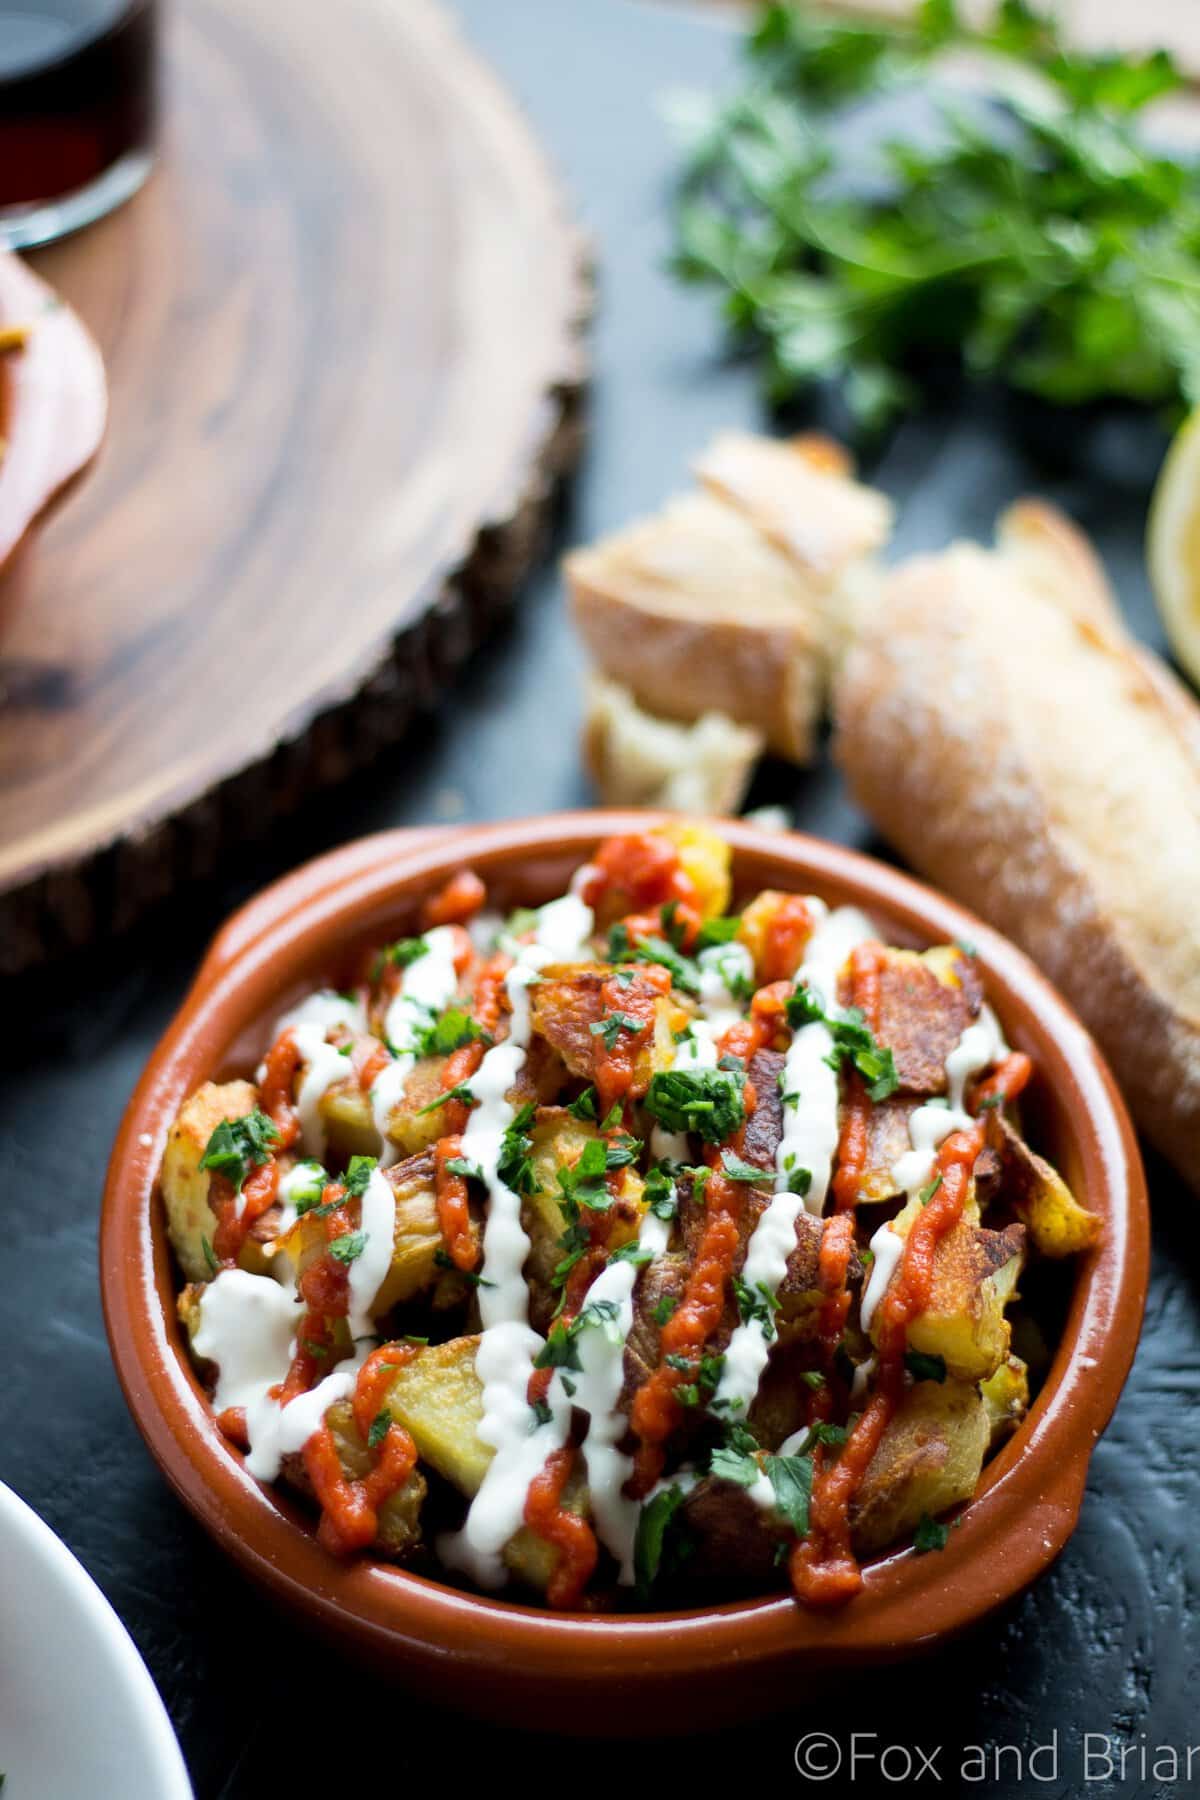 These patatas bravas are crispy even though they are baked not fried! Topped with a delicious smoky salsa brava and garlic aioli, they are totally addictive!